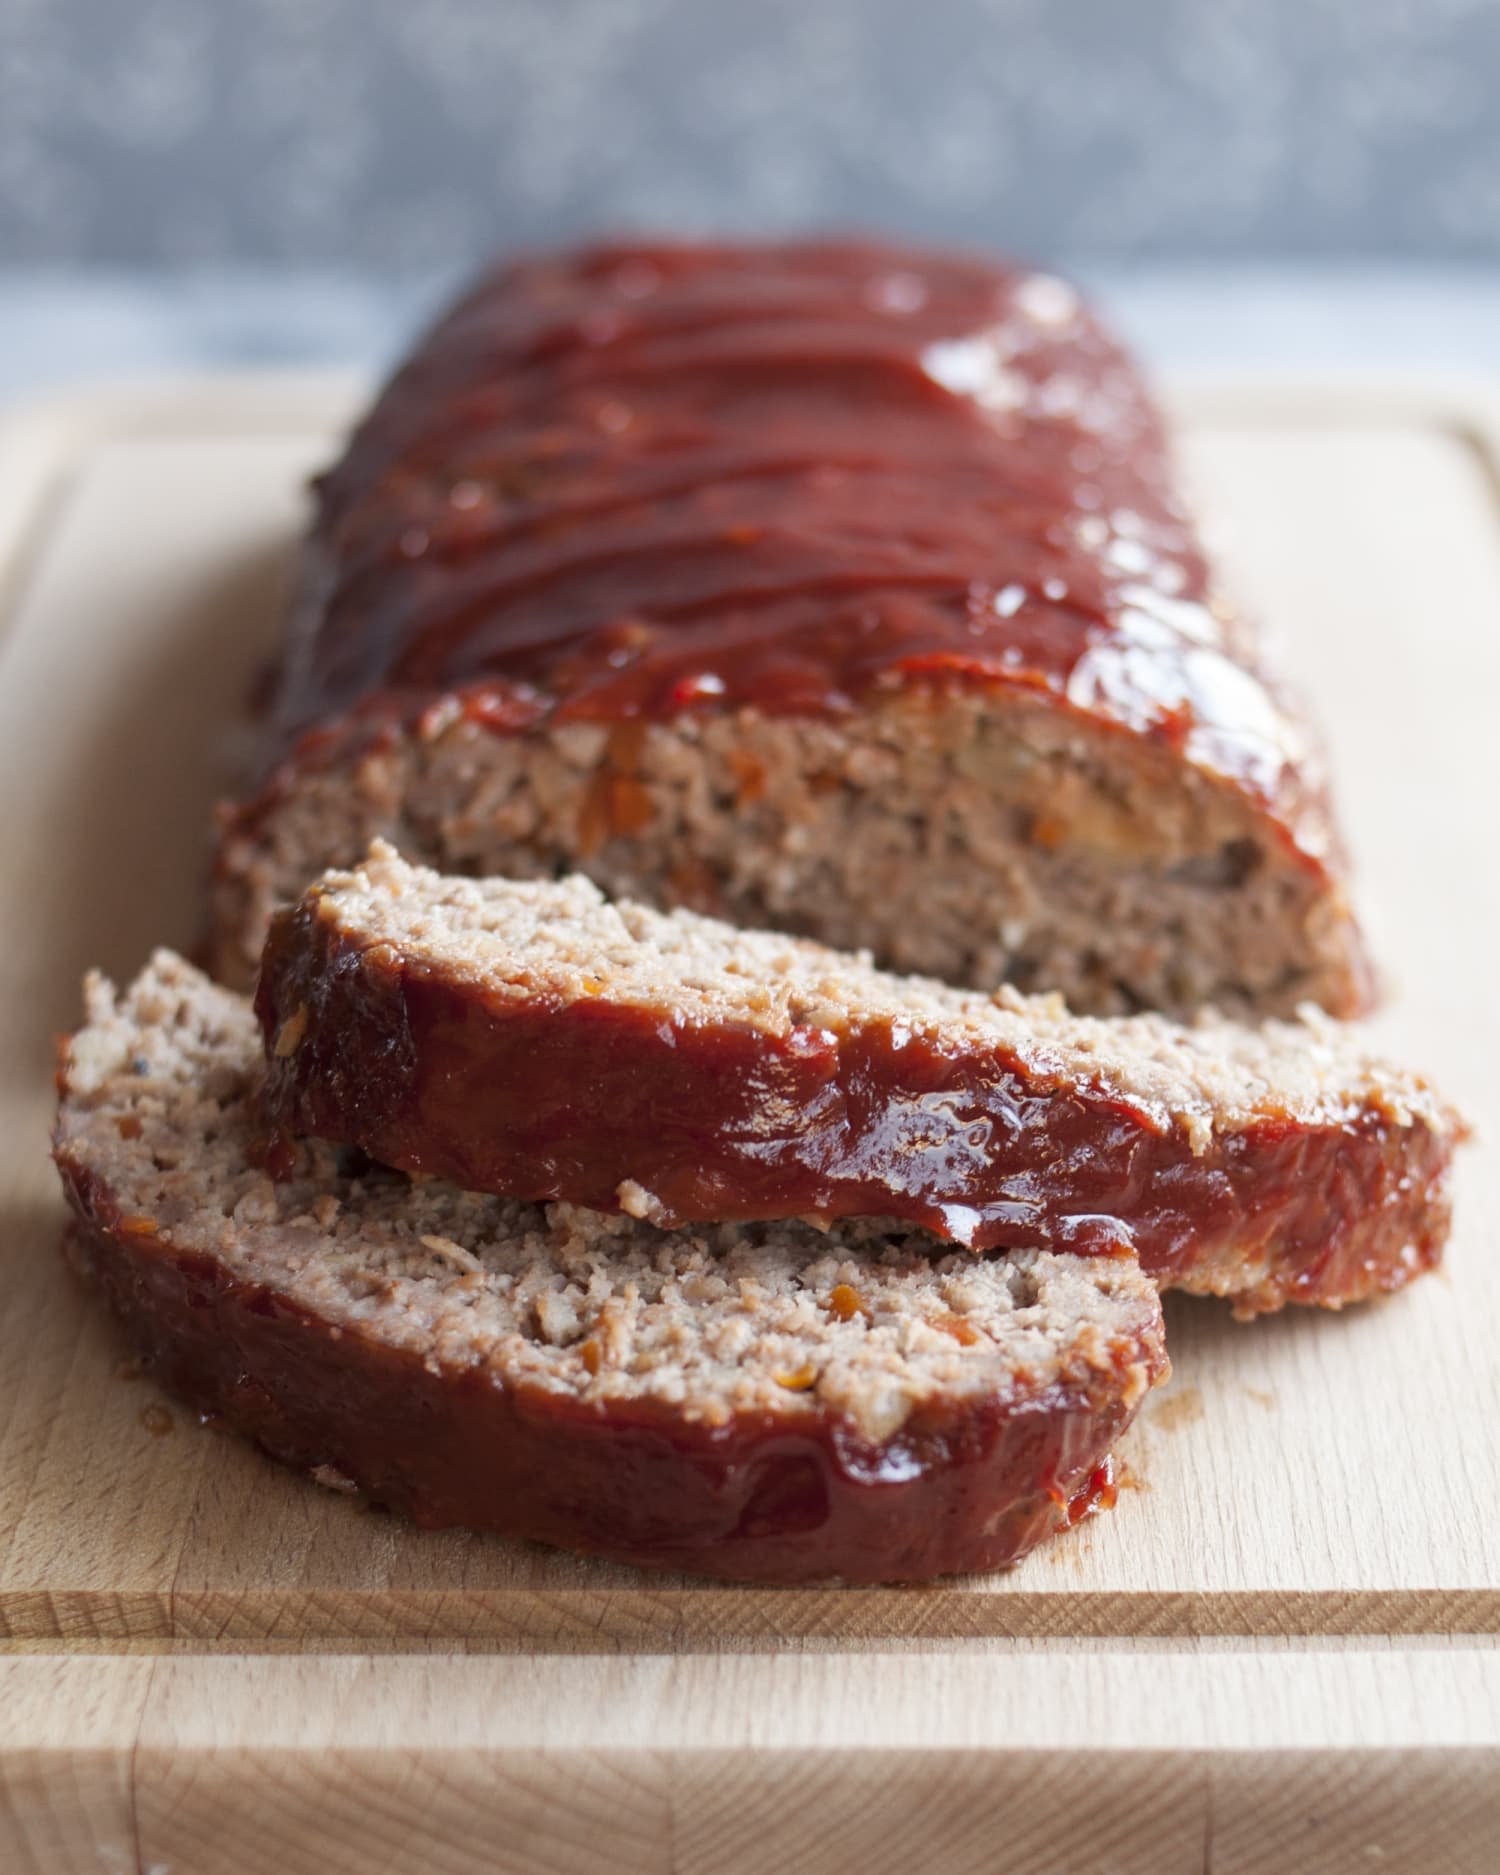 How To Make Meatloaf from Scratch